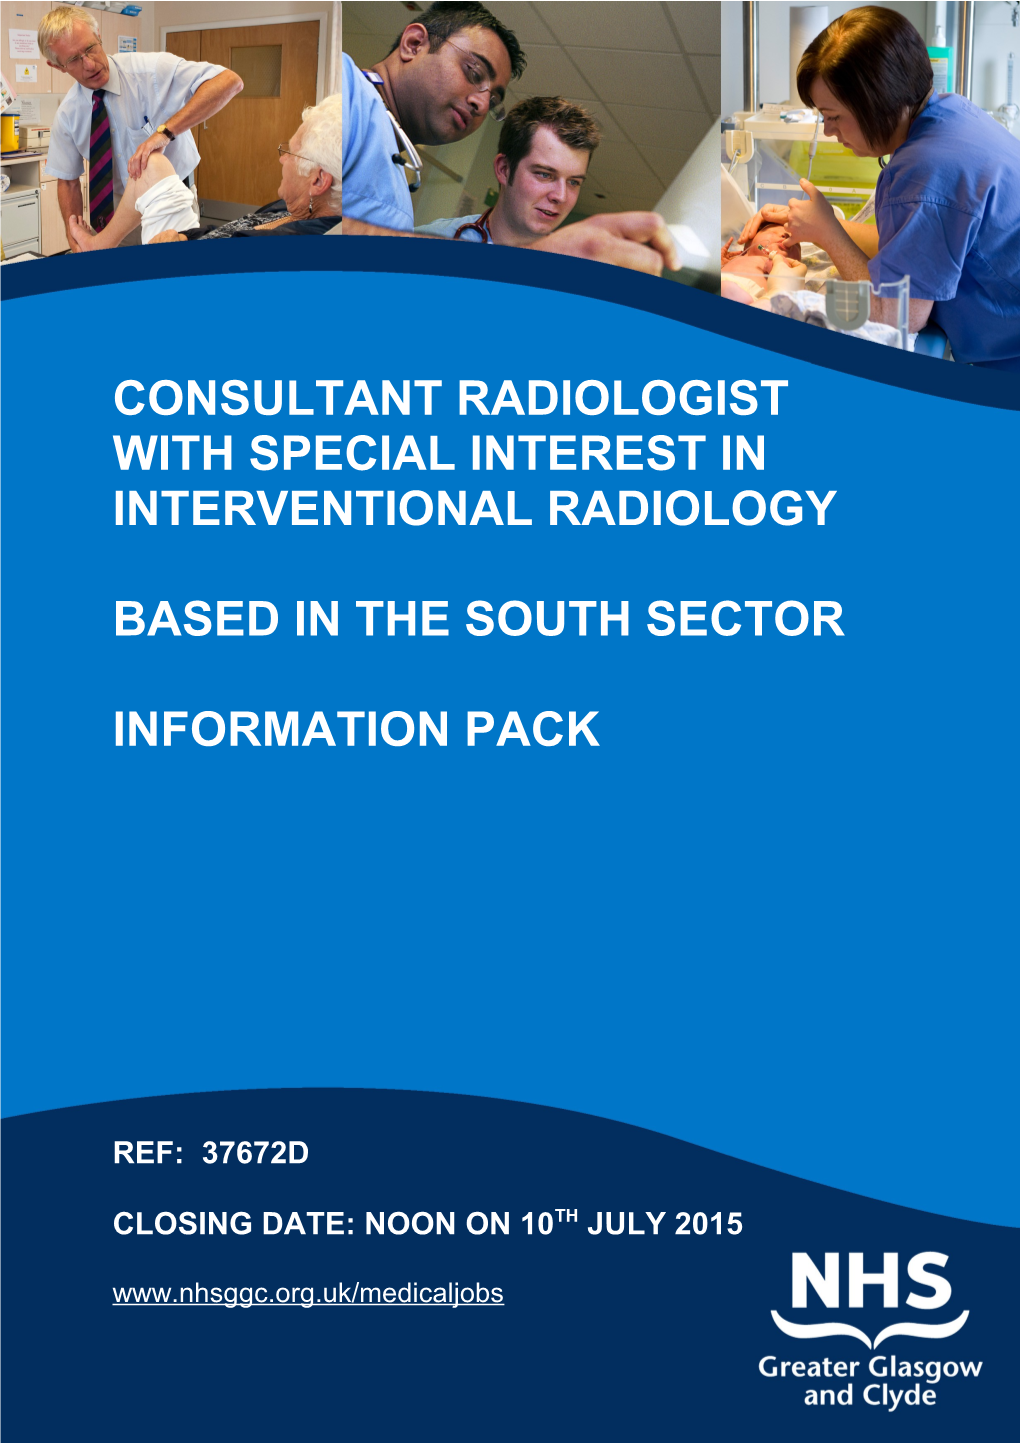 With SPECIAL Interest in Interventional Radiology